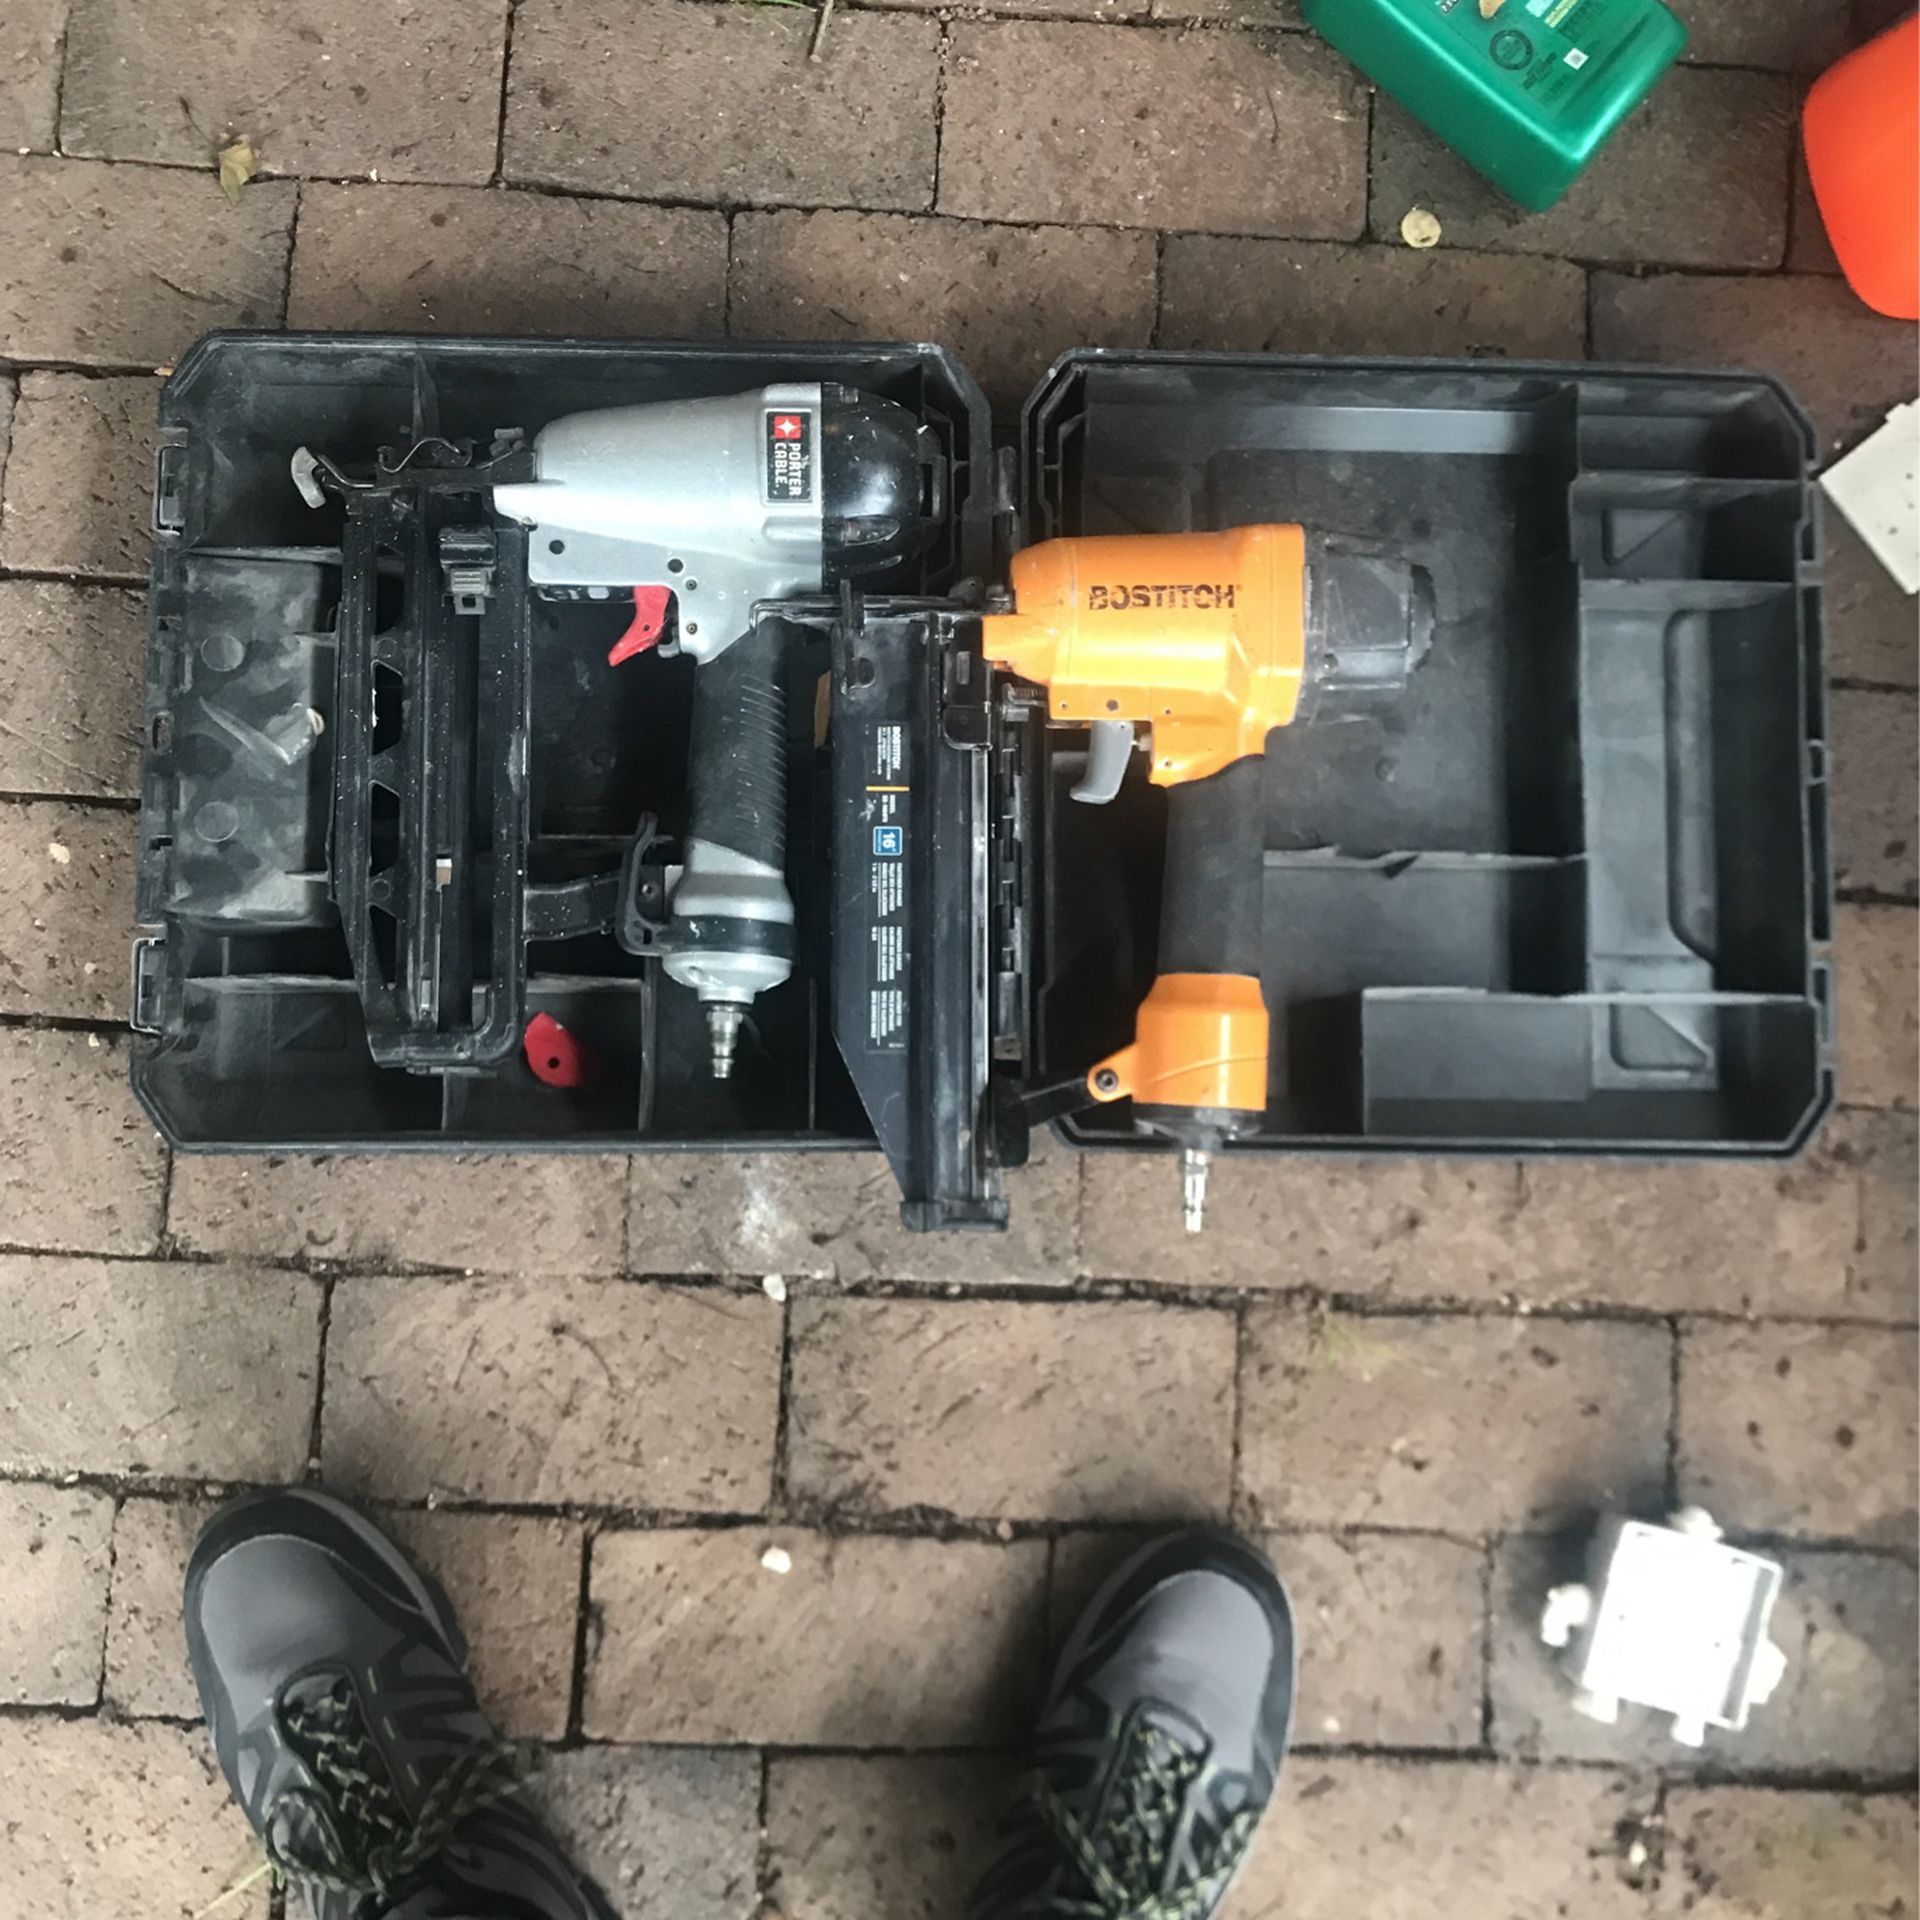  Bostitich And Proter Cable Nail gun 